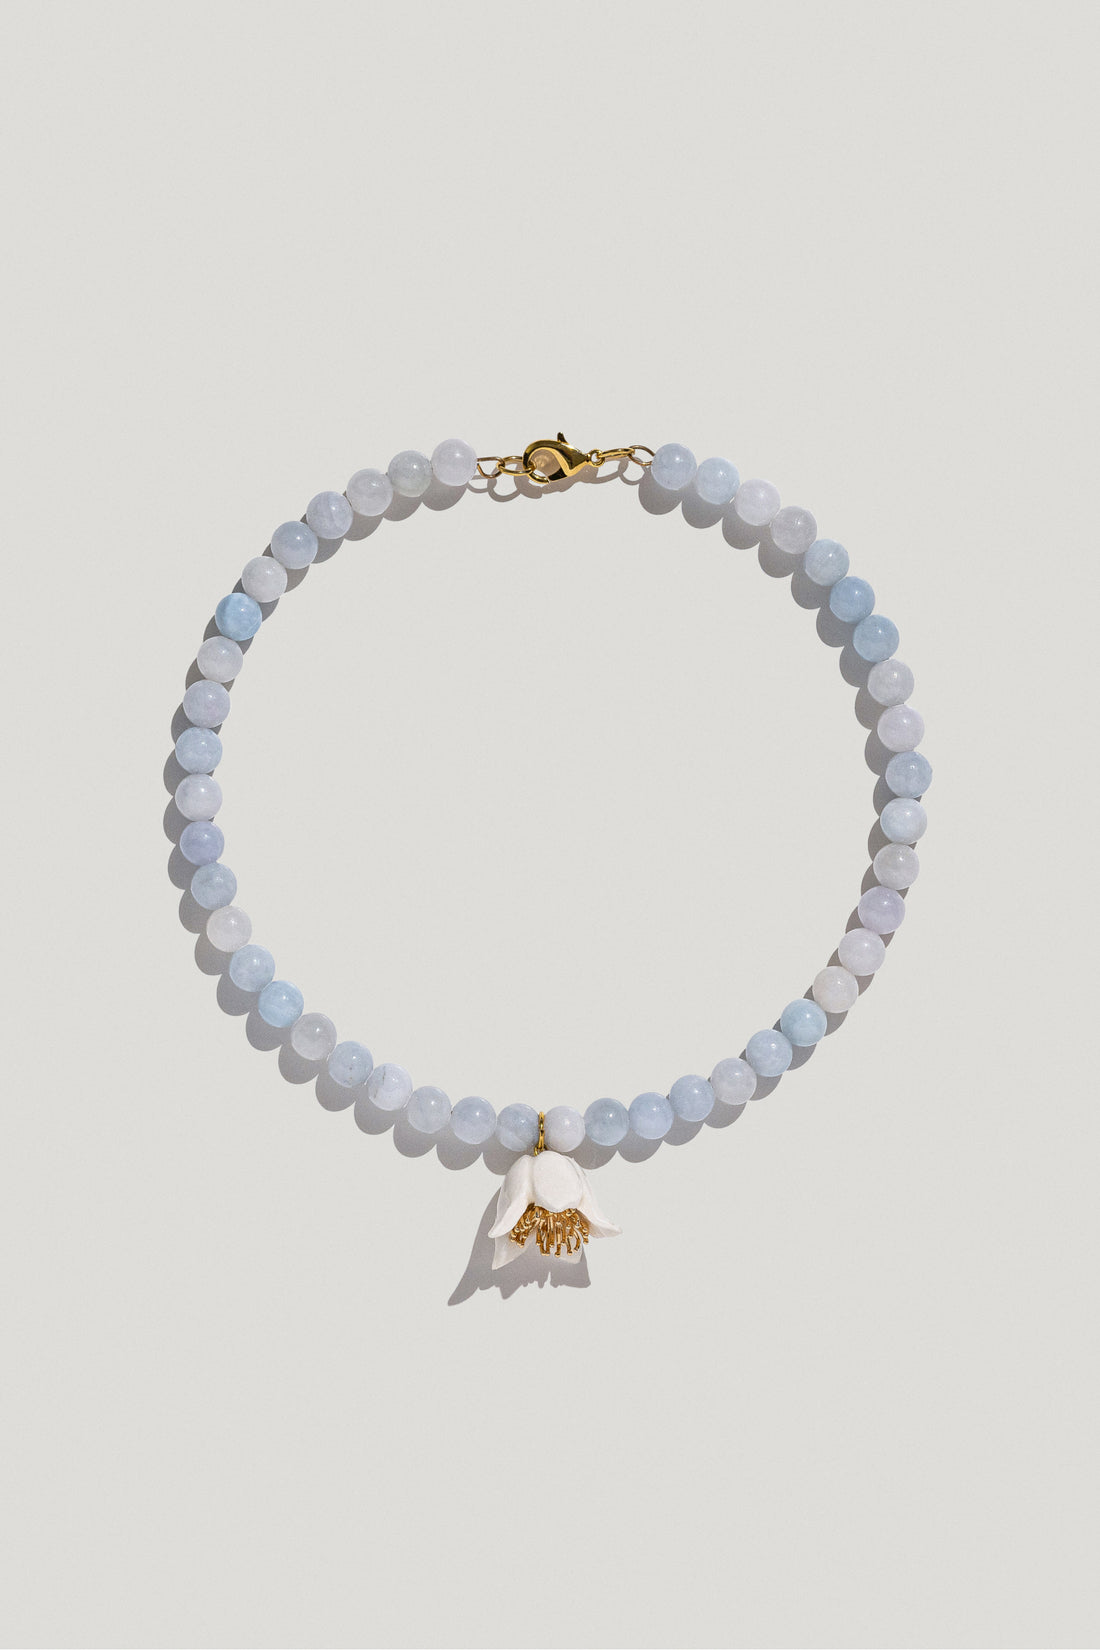 Polysk necklace with blue quartz and white flower